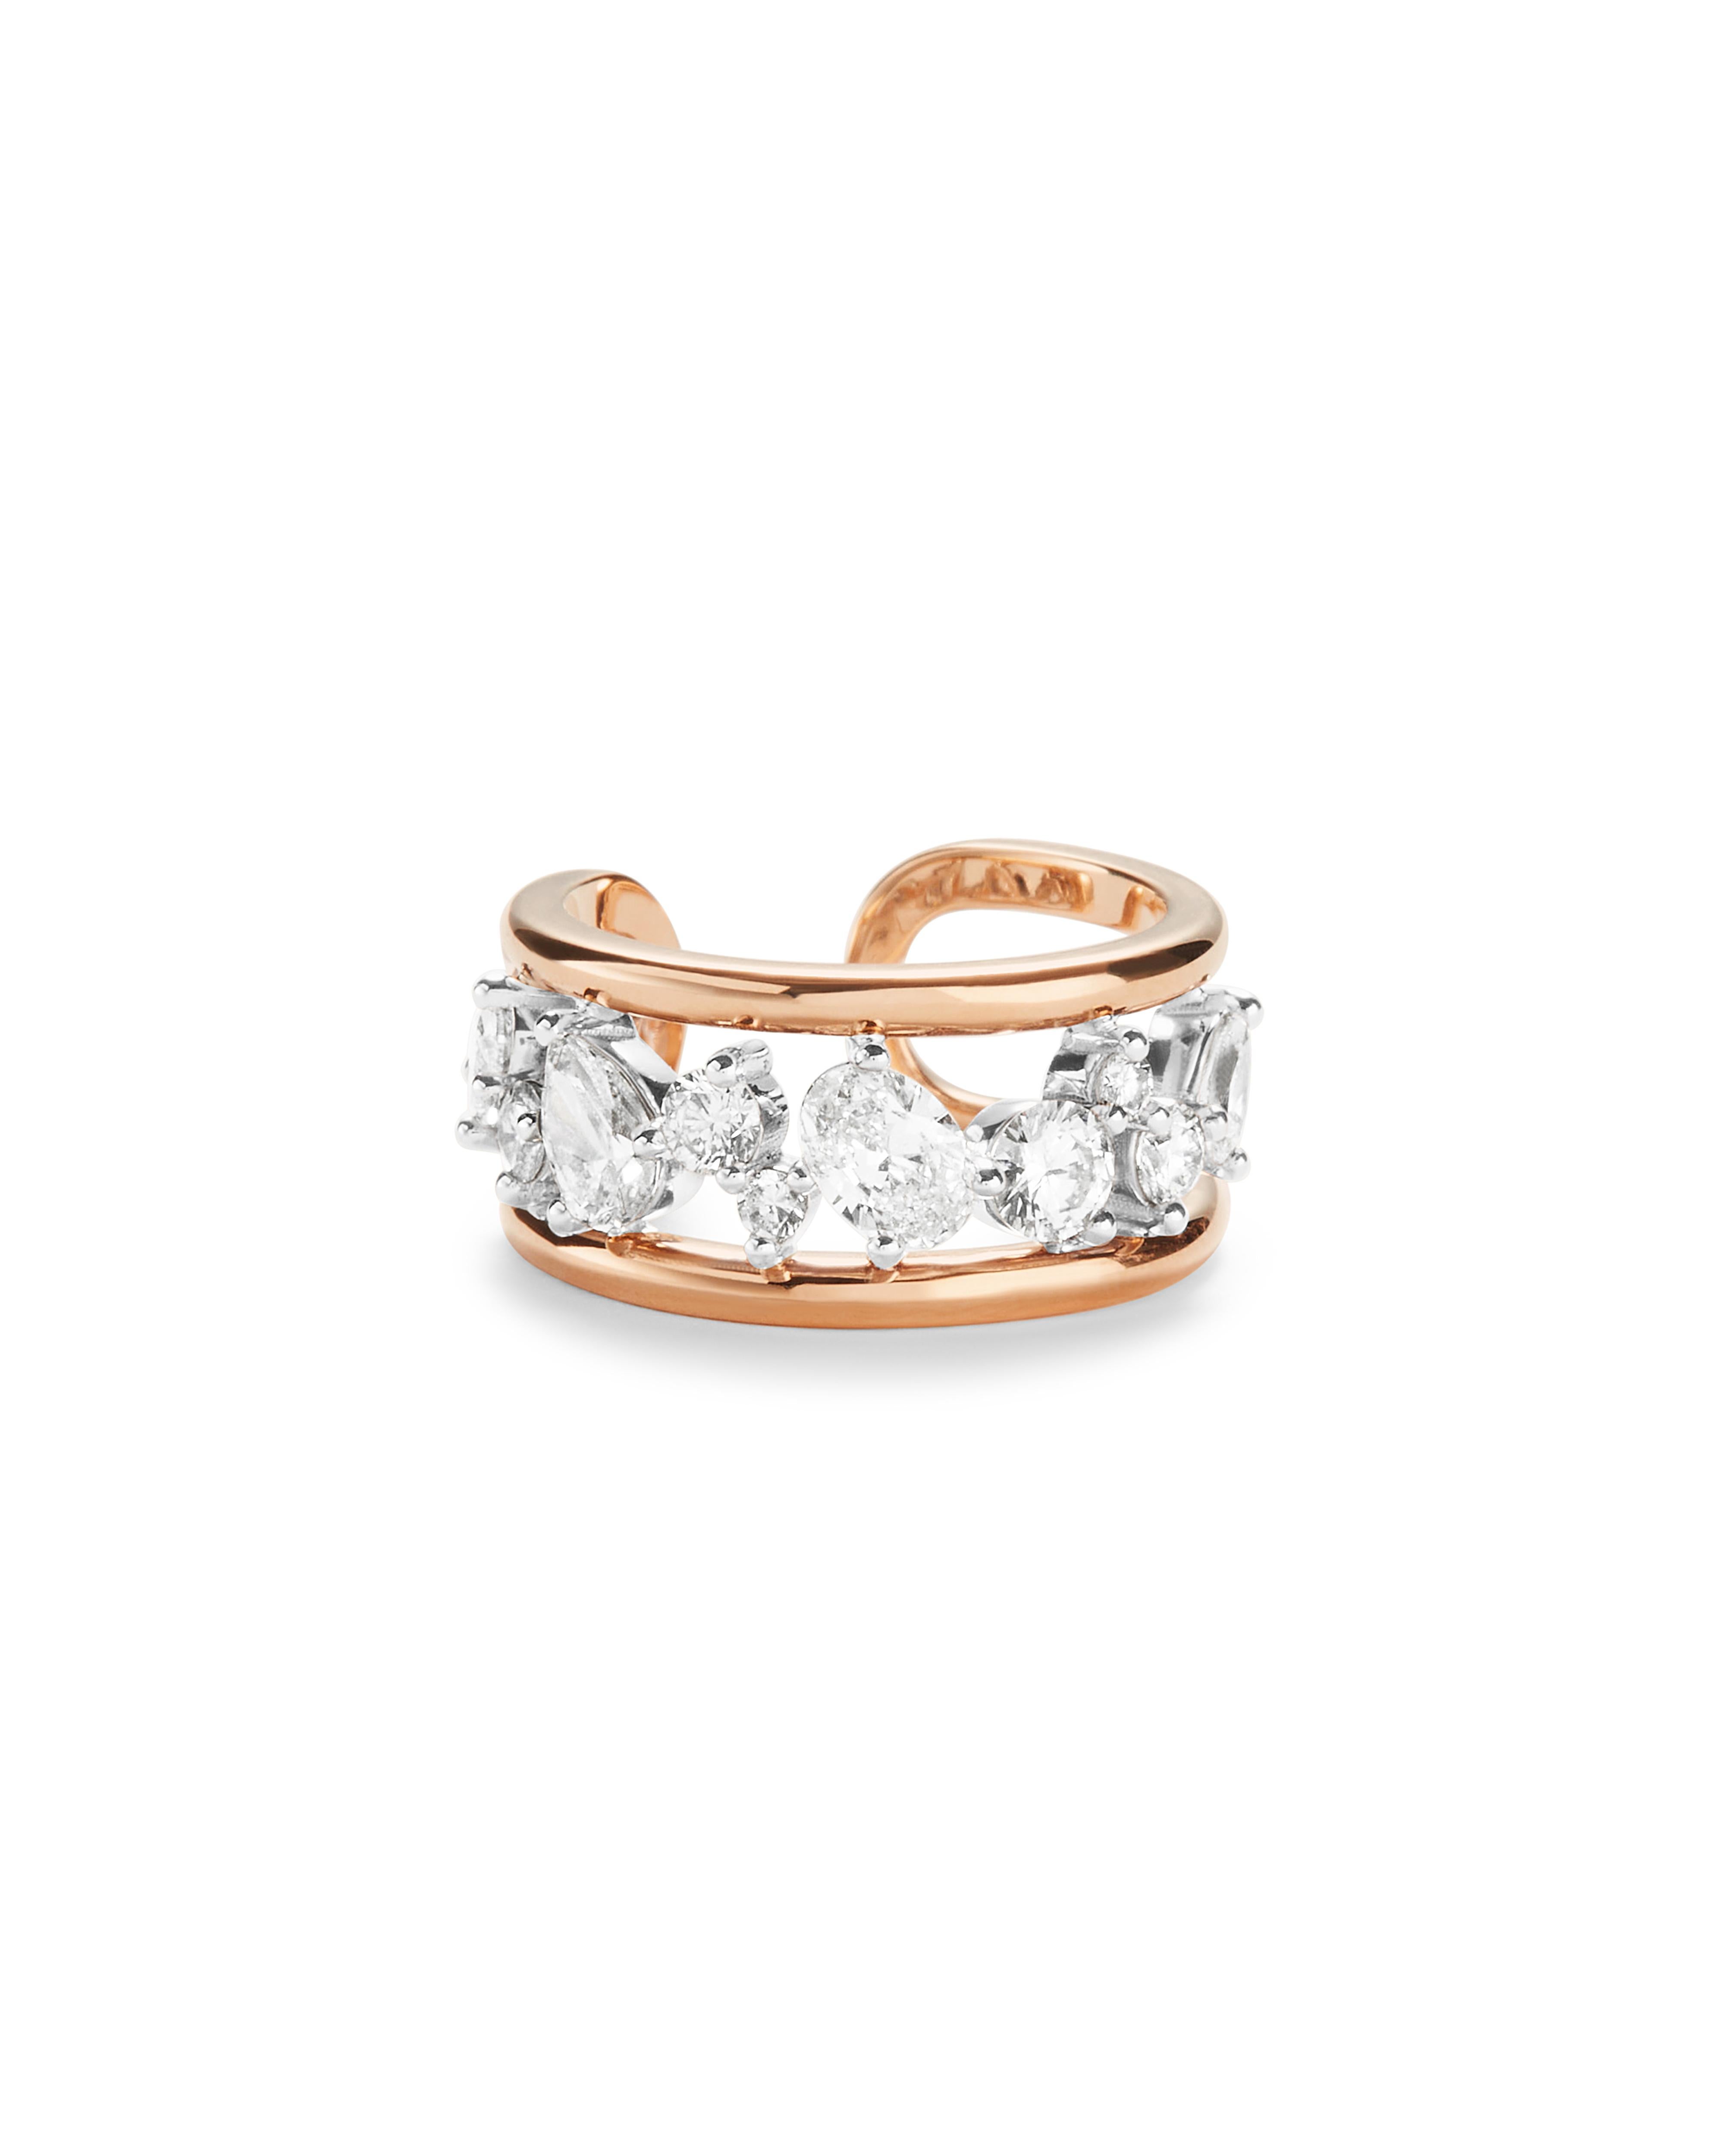 For Sale:  Rosario Navia Mara Large Link Ring in 18K Gold, Platinum, and Diamonds 4